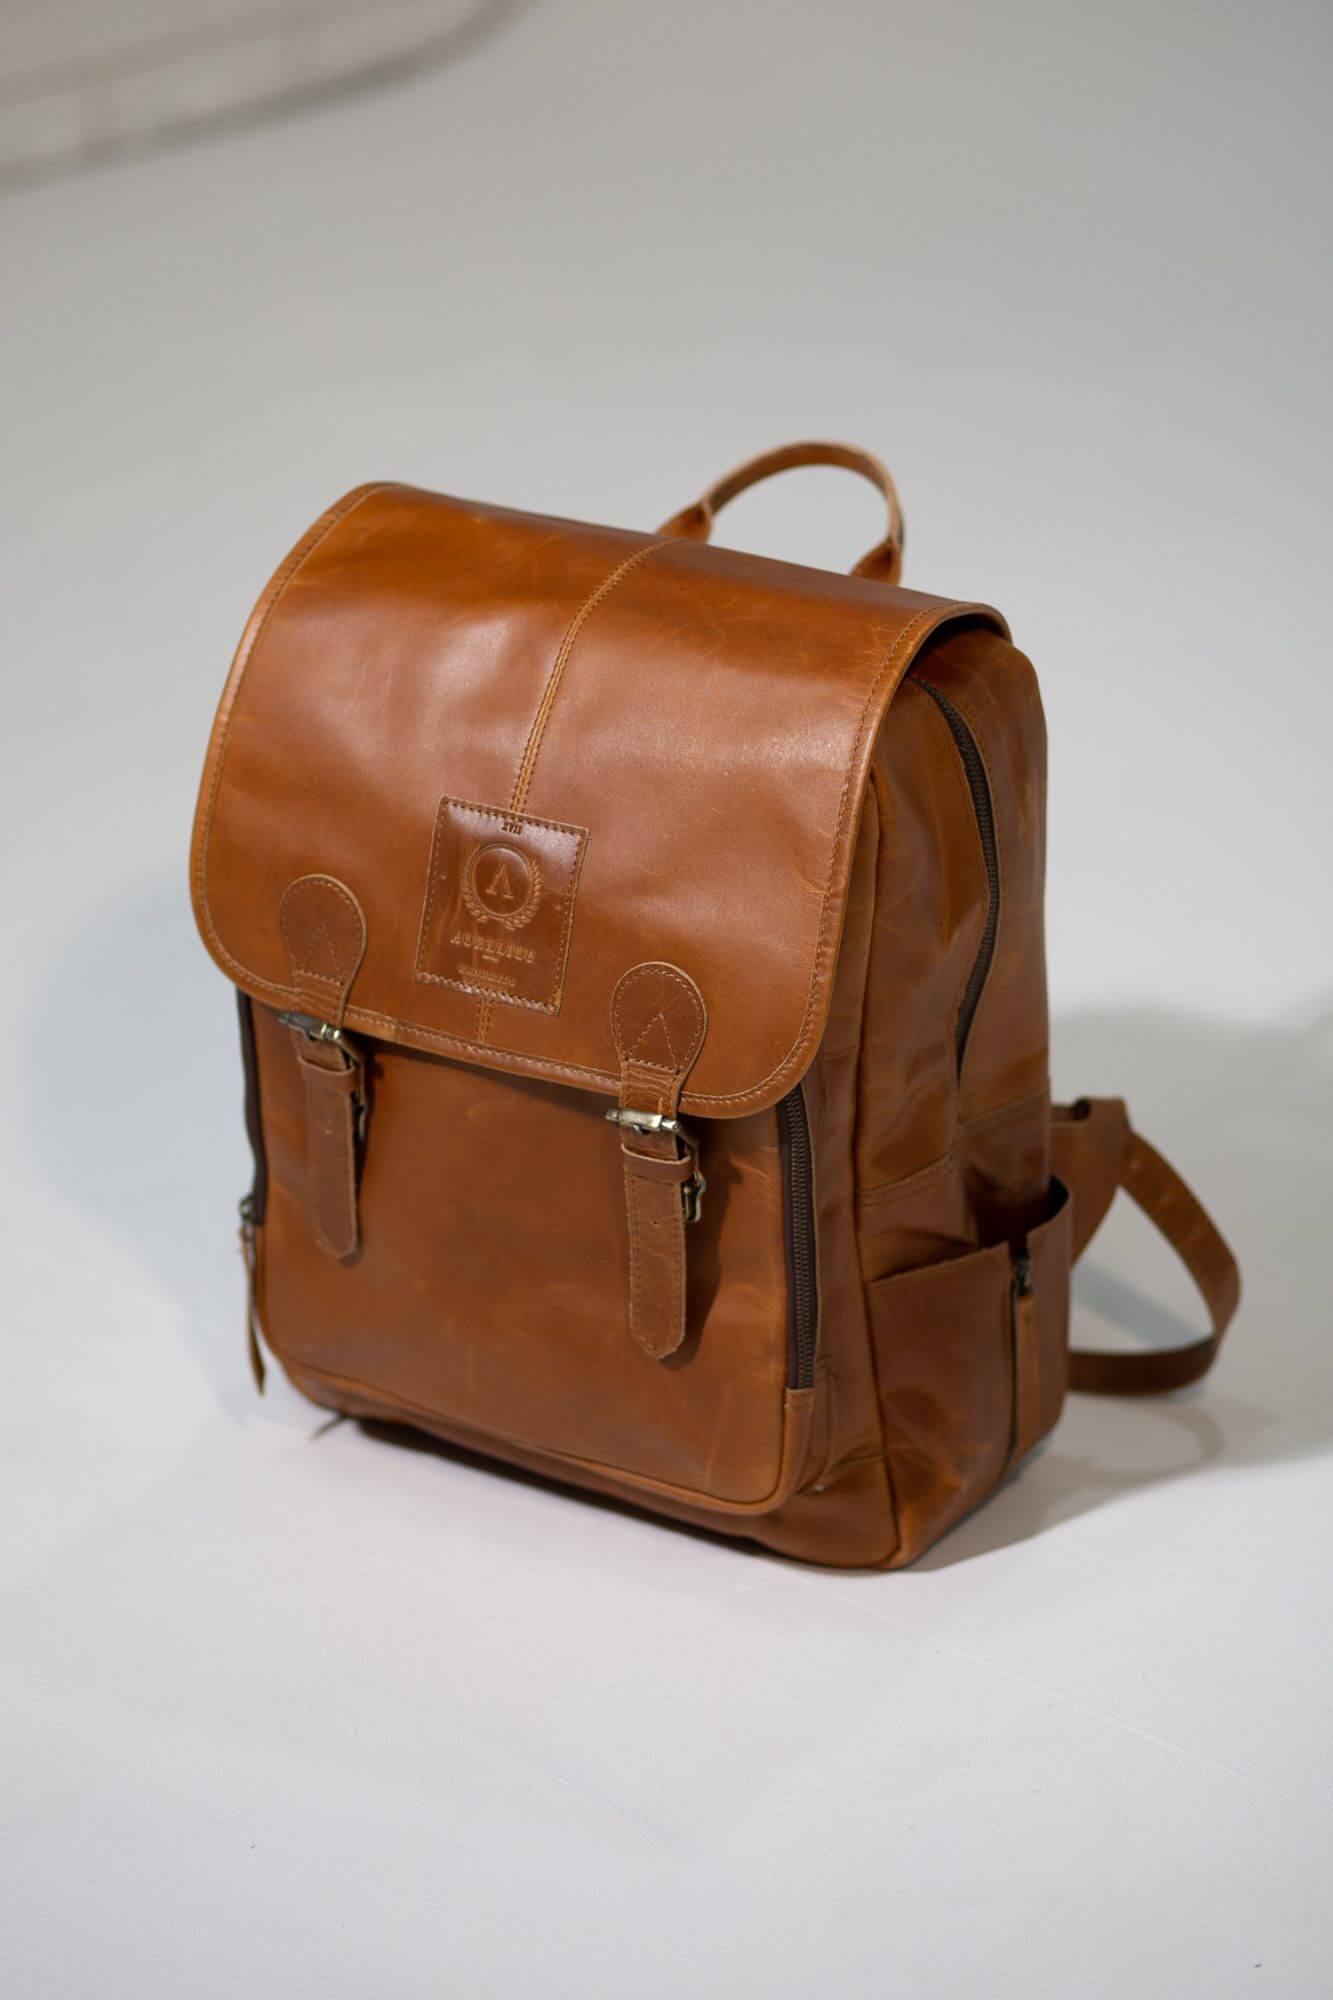 Aurelius Leather Leather Bag Baby Backpack Oscar Leather Baby Backpack